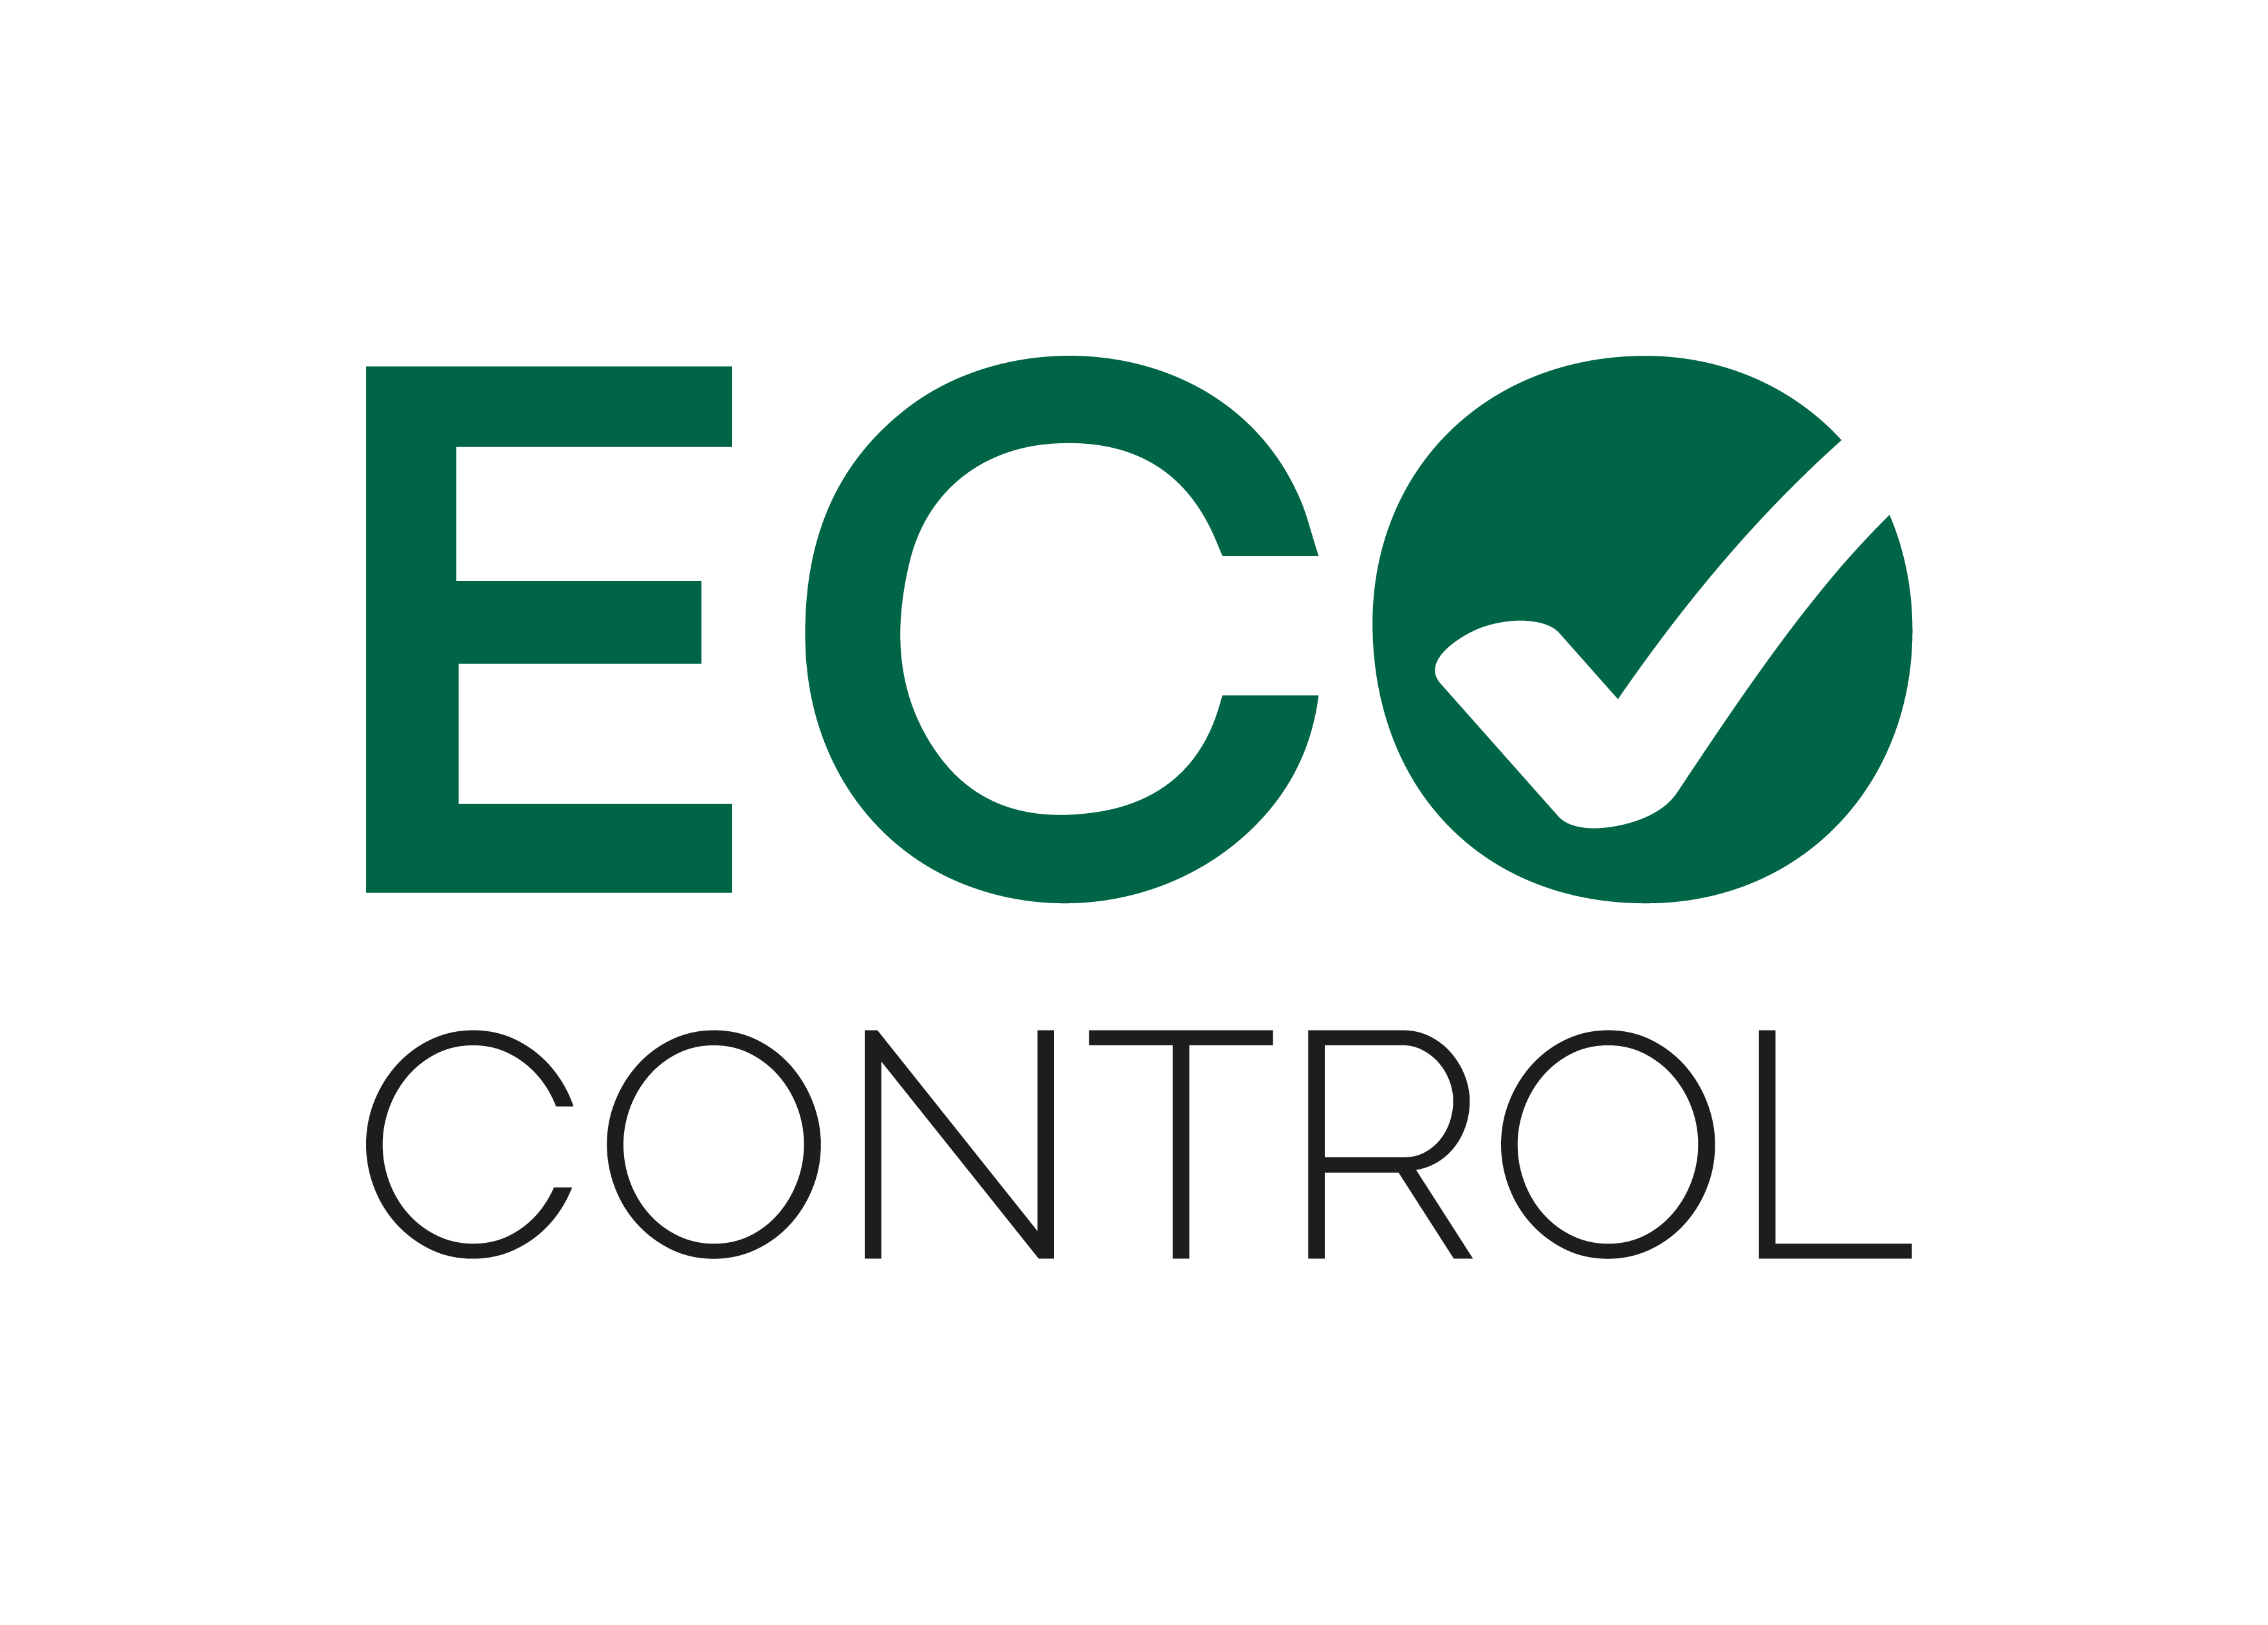 Golden Bull Readymix cleaning and care agent for aircraft leather is certified by EcoControl certification authority.